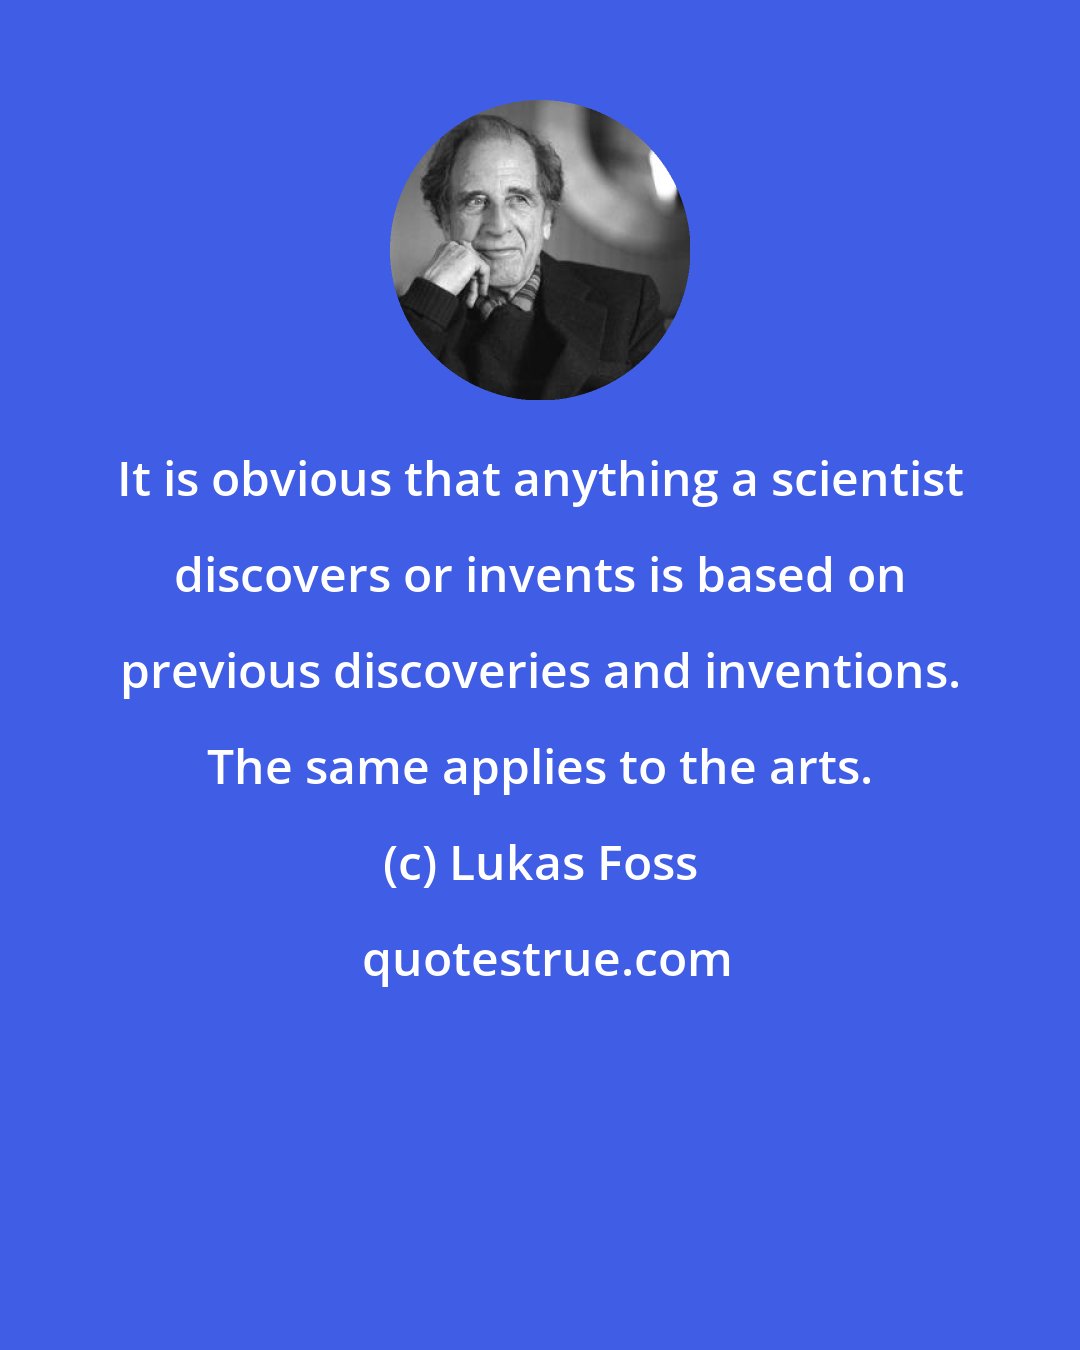 Lukas Foss: It is obvious that anything a scientist discovers or invents is based on previous discoveries and inventions. The same applies to the arts.